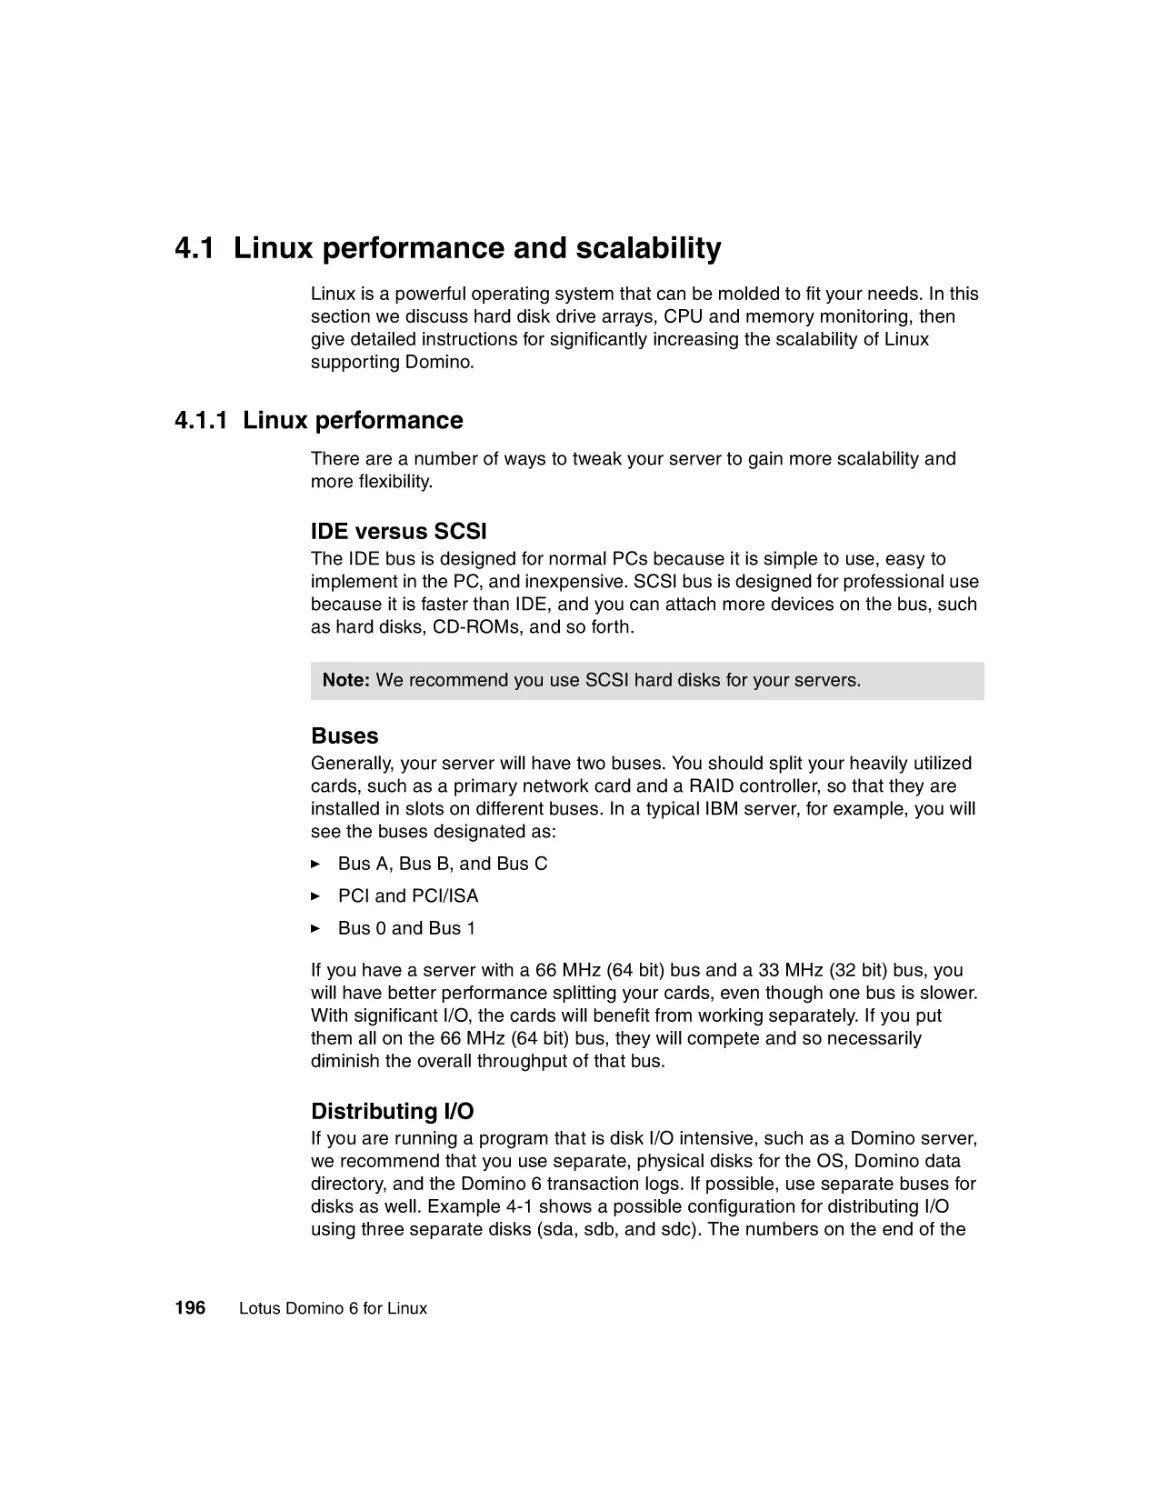 4.1 Linux performance and scalability
4.1.1 Linux performance